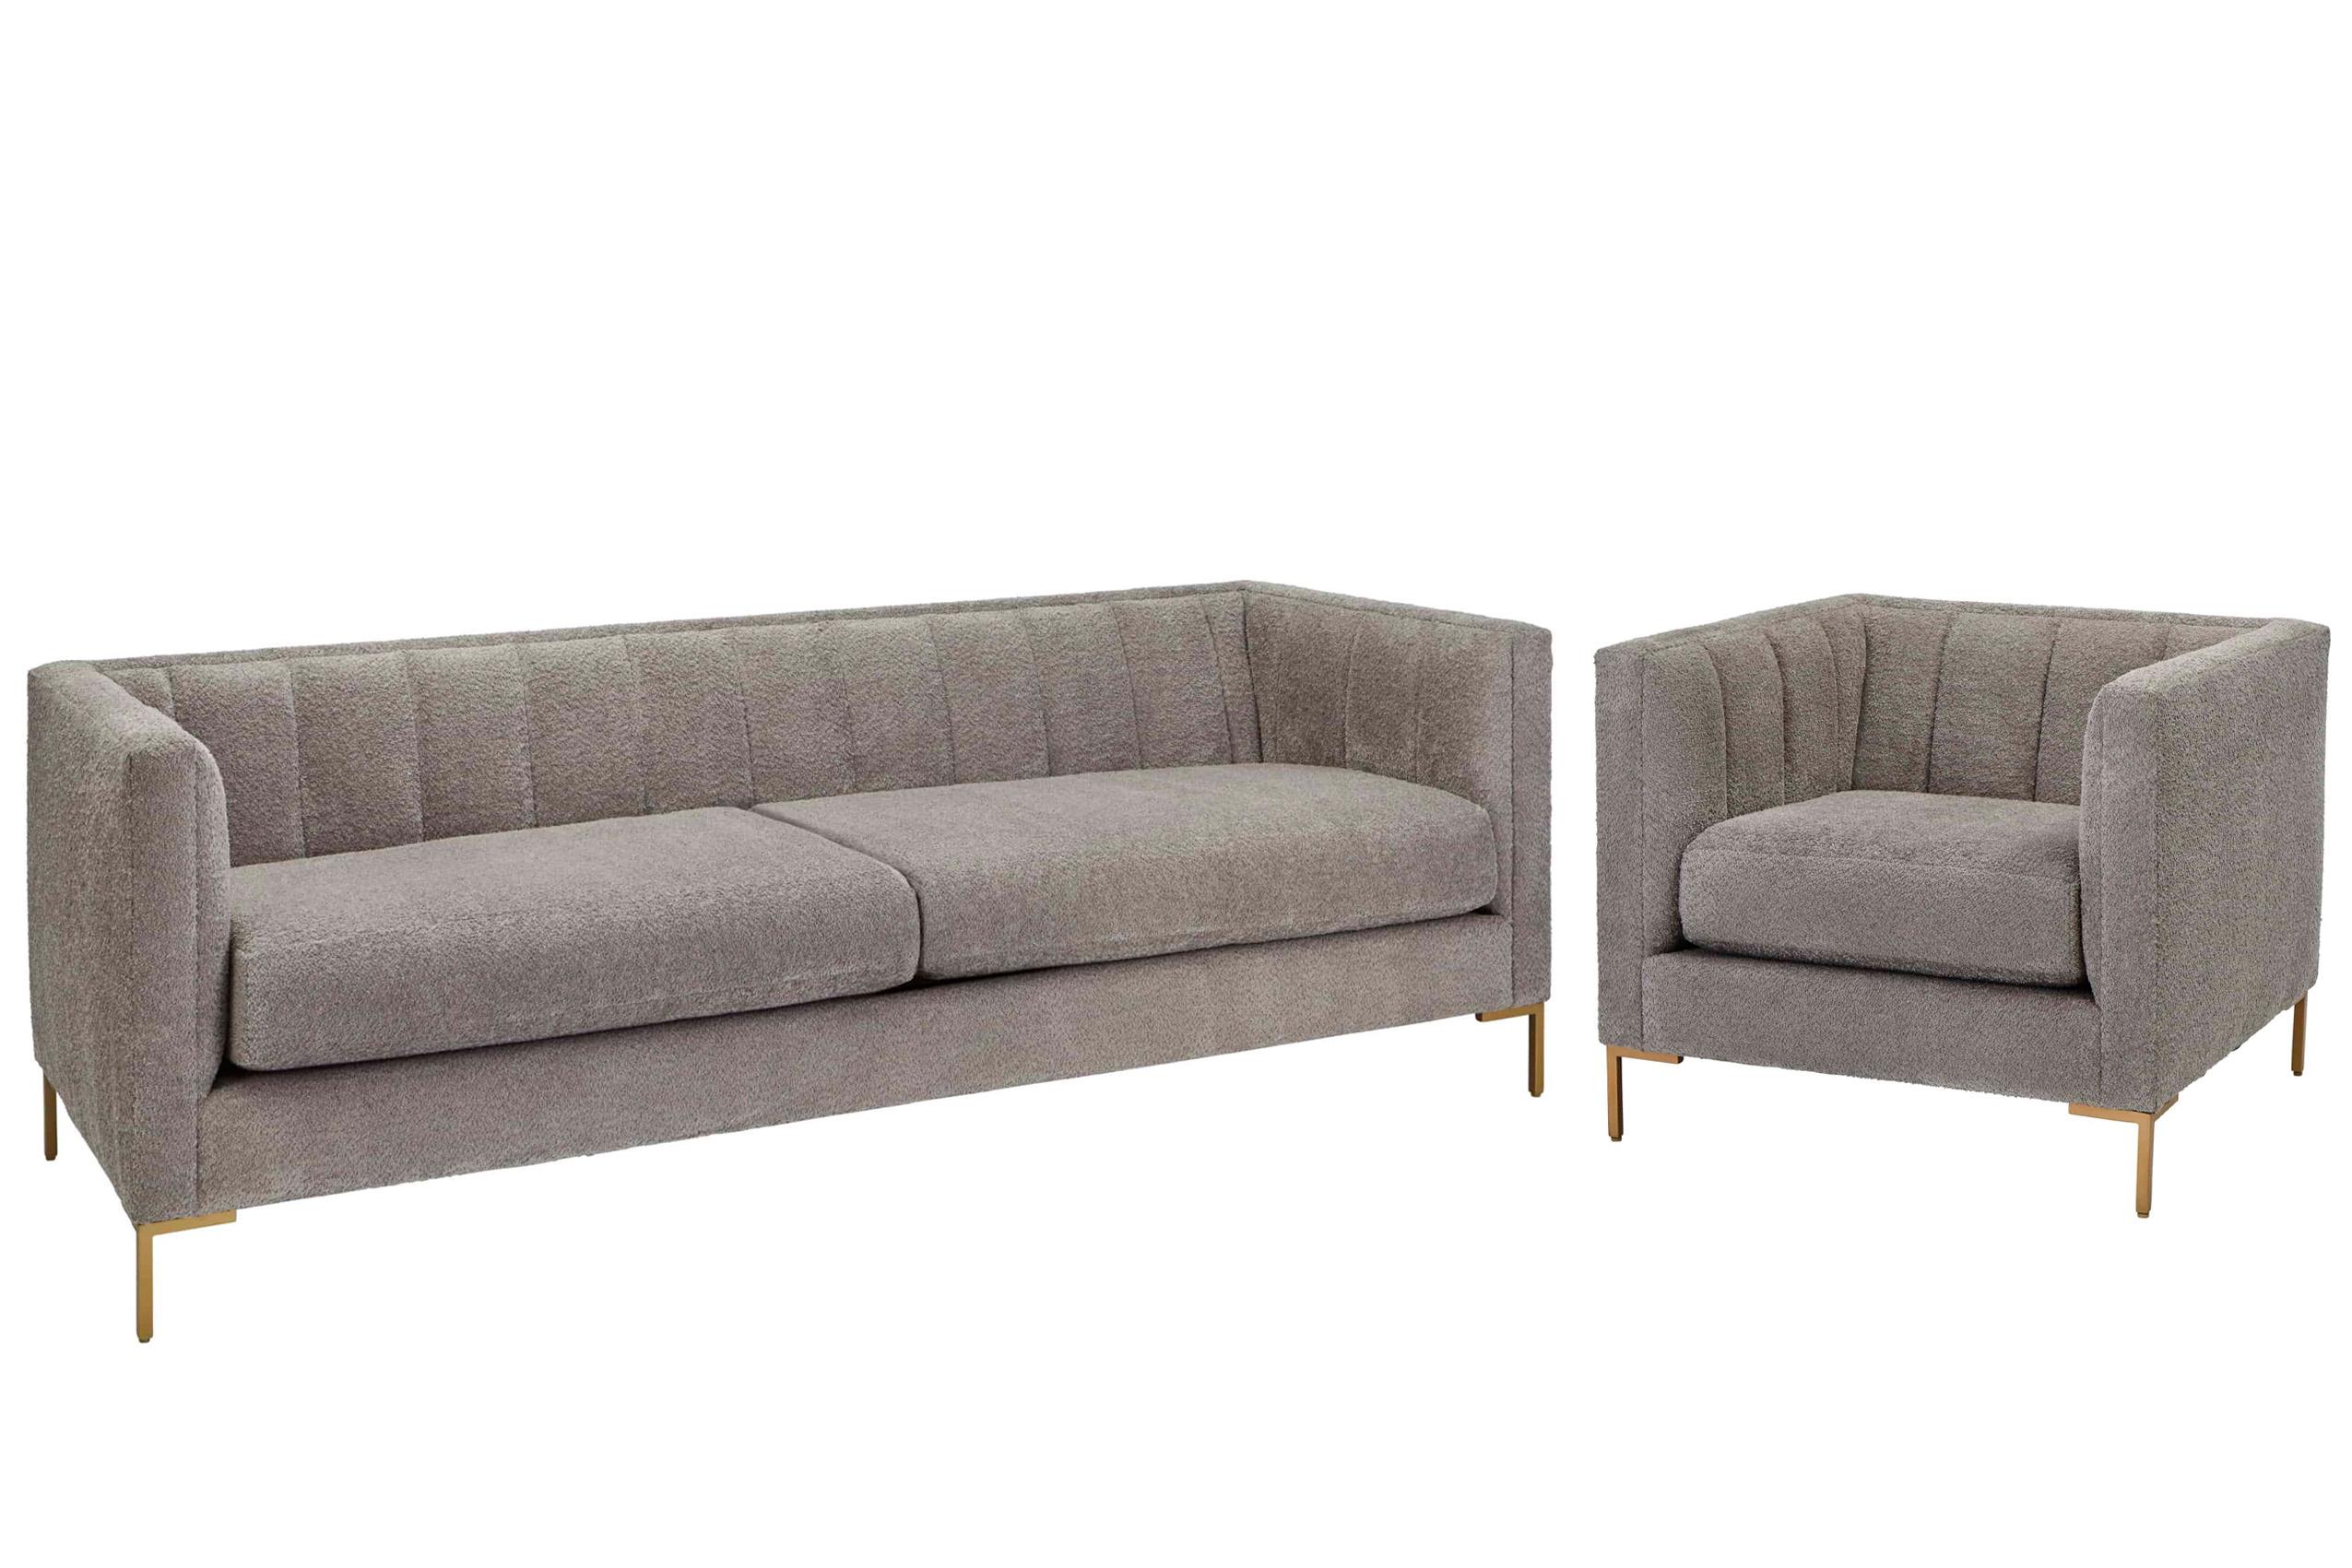 Contemporary, Modern Sofa Set 772501-5026F3-Set 772501-5026F3-Set-2 in Pewter Fabric